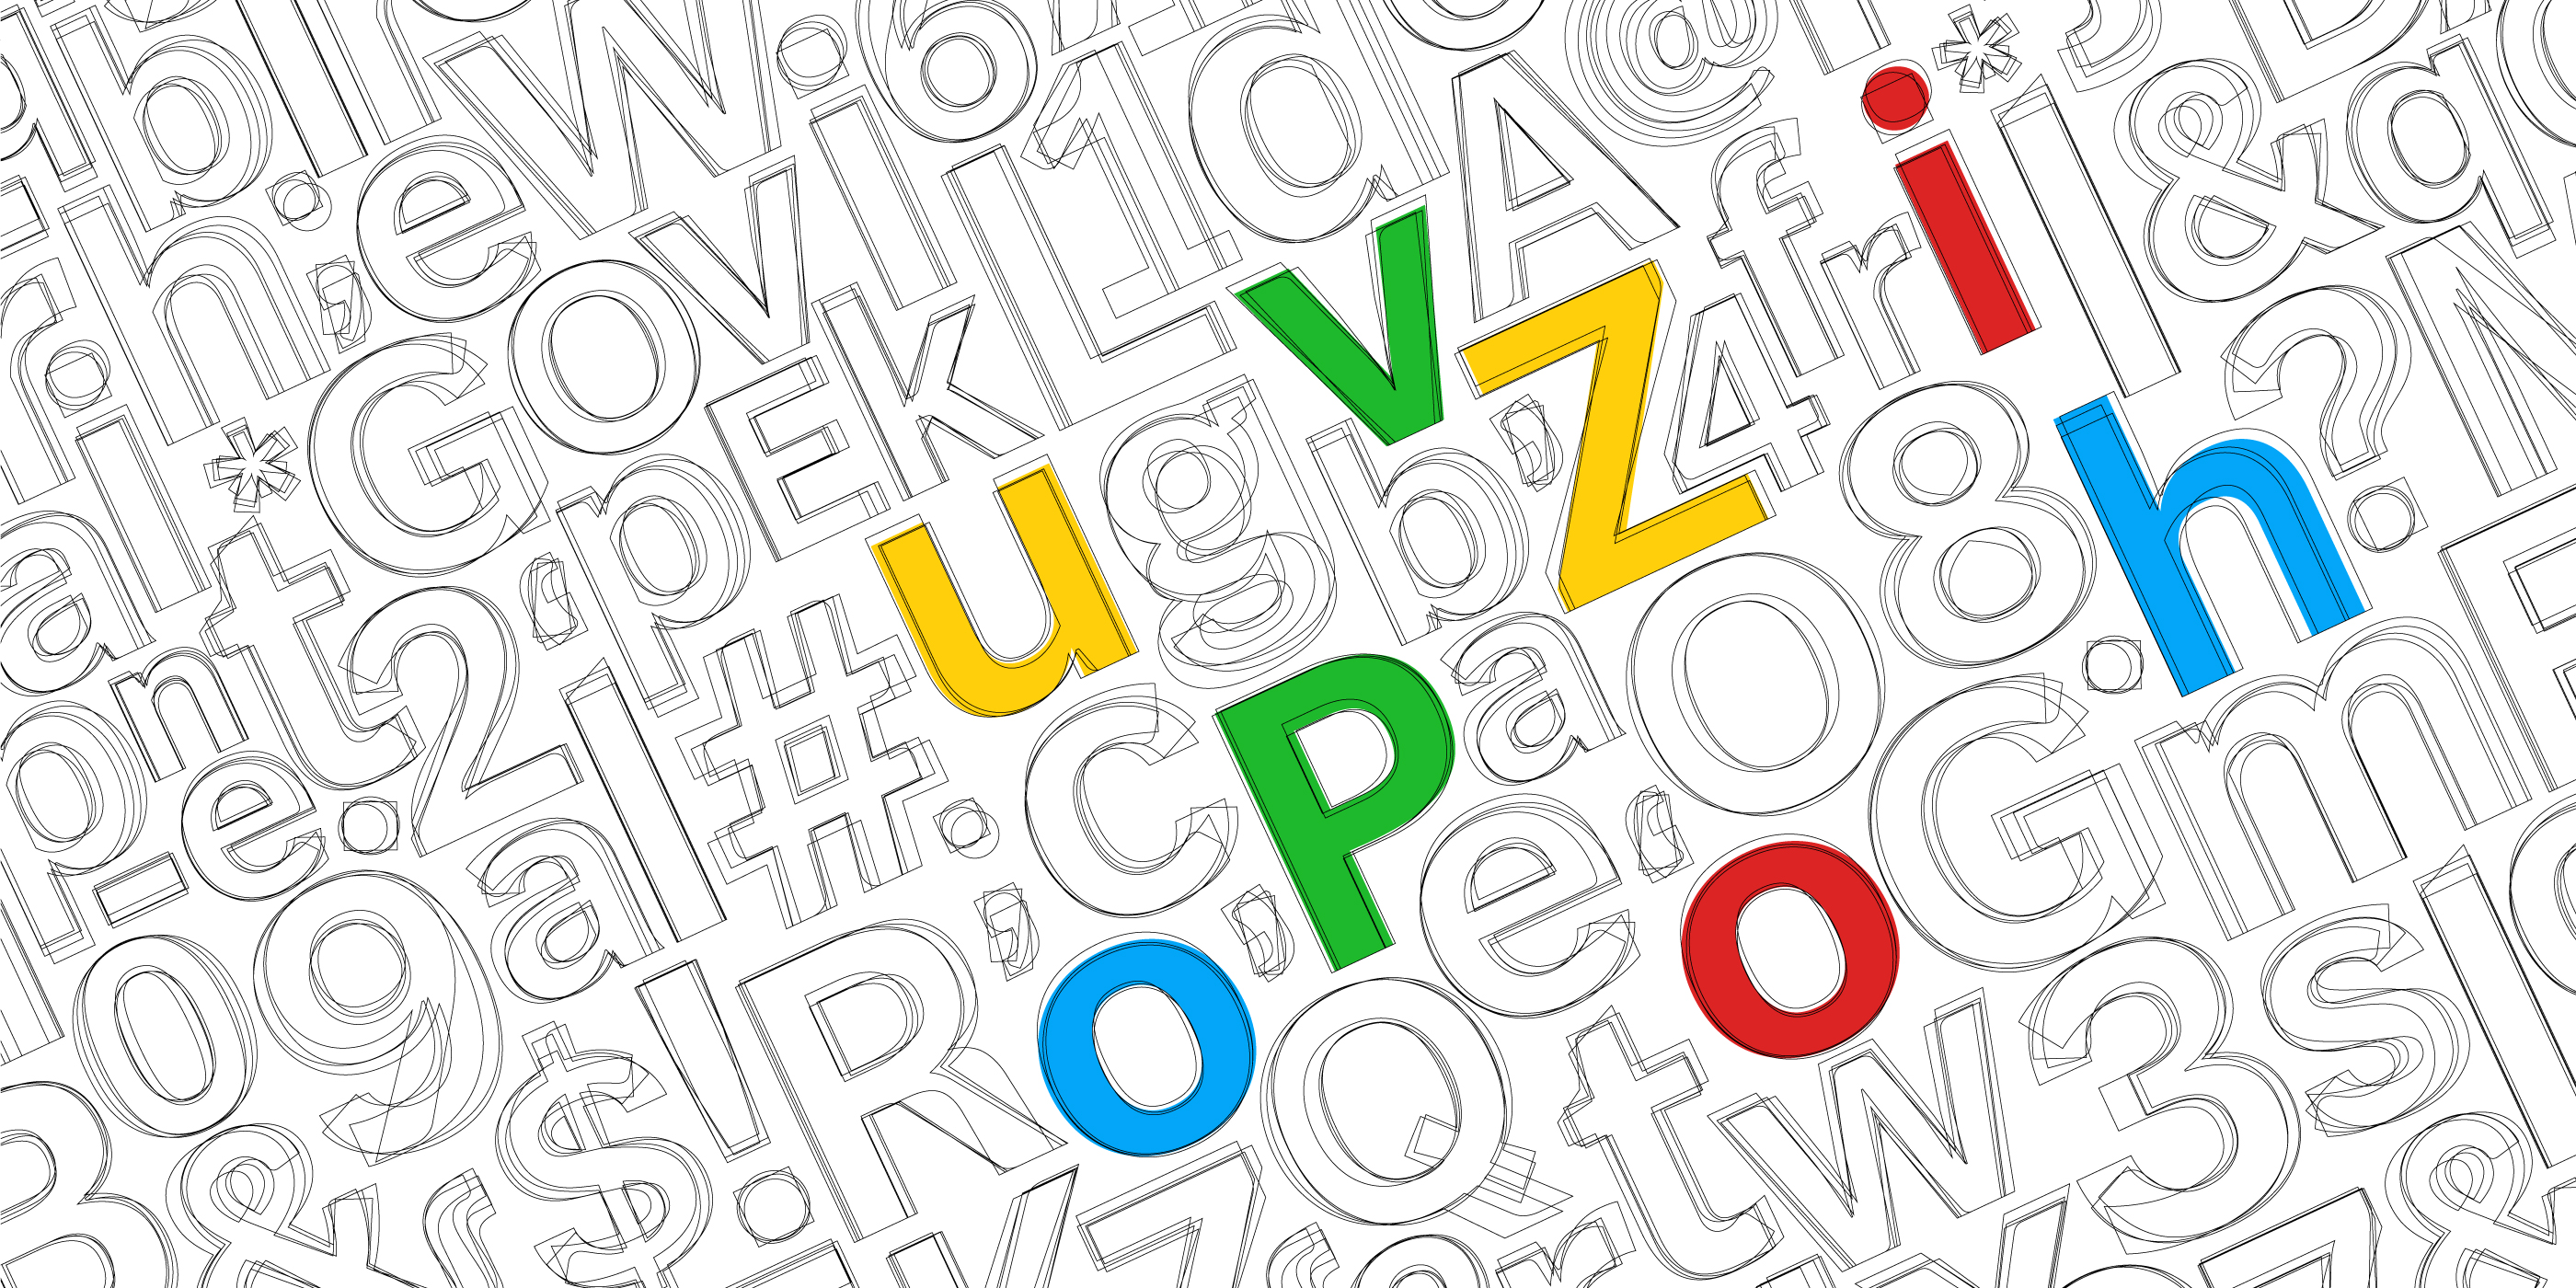 Introducing Puvi–A down-to-earth font from Zoho